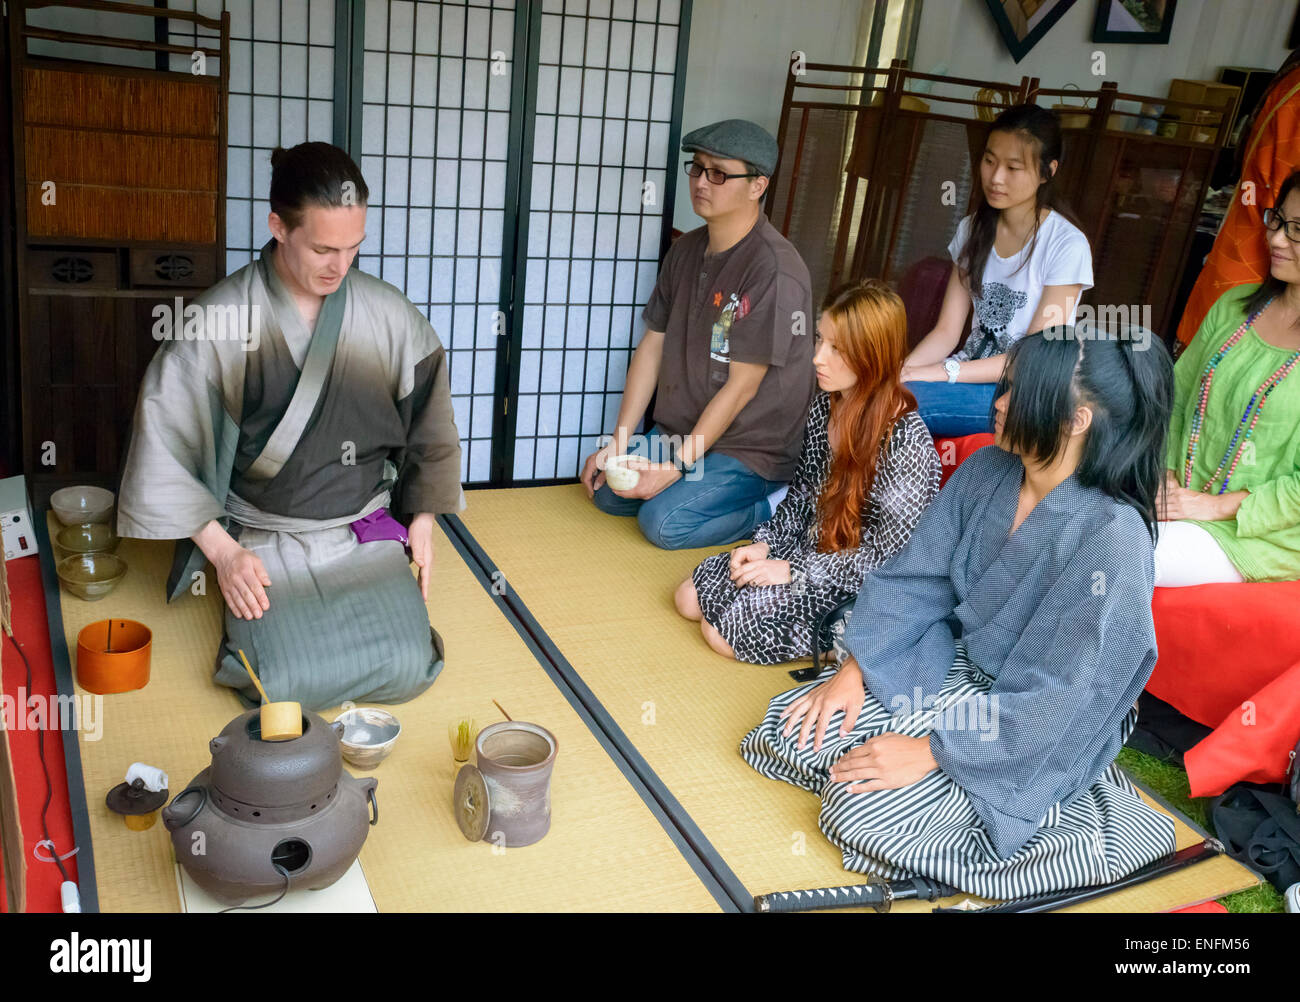 Tea ceremony demonstration, on tatami mats and with traditional equipment used for cha-no-yu. Traditional costumes, male kimono. Mixed race people. Stock Photo